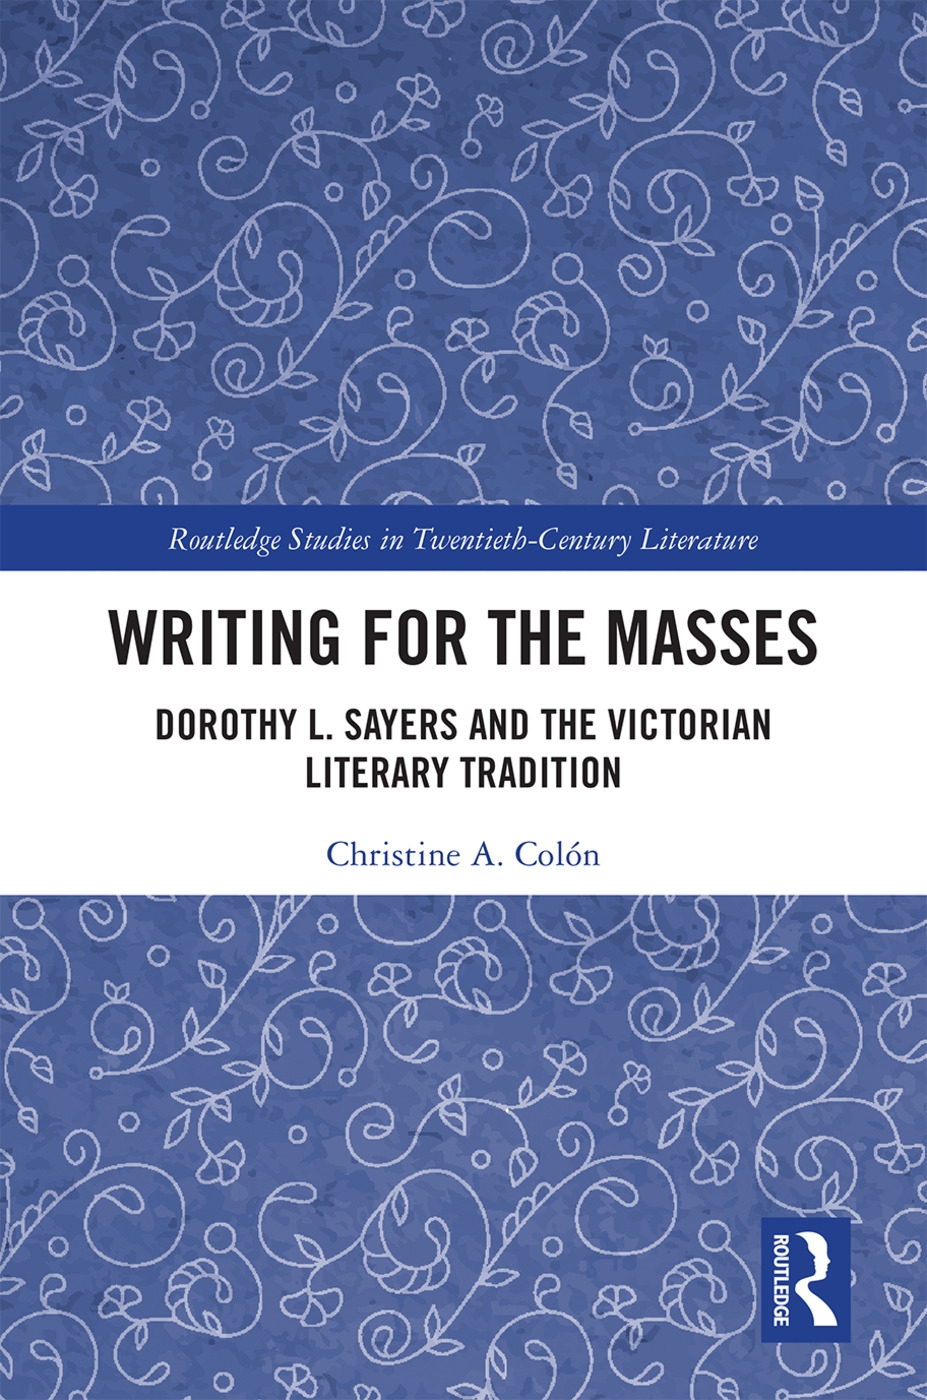 Writing for the Masses: Dorothy L. Sayers and the Victorian Literary Tradition